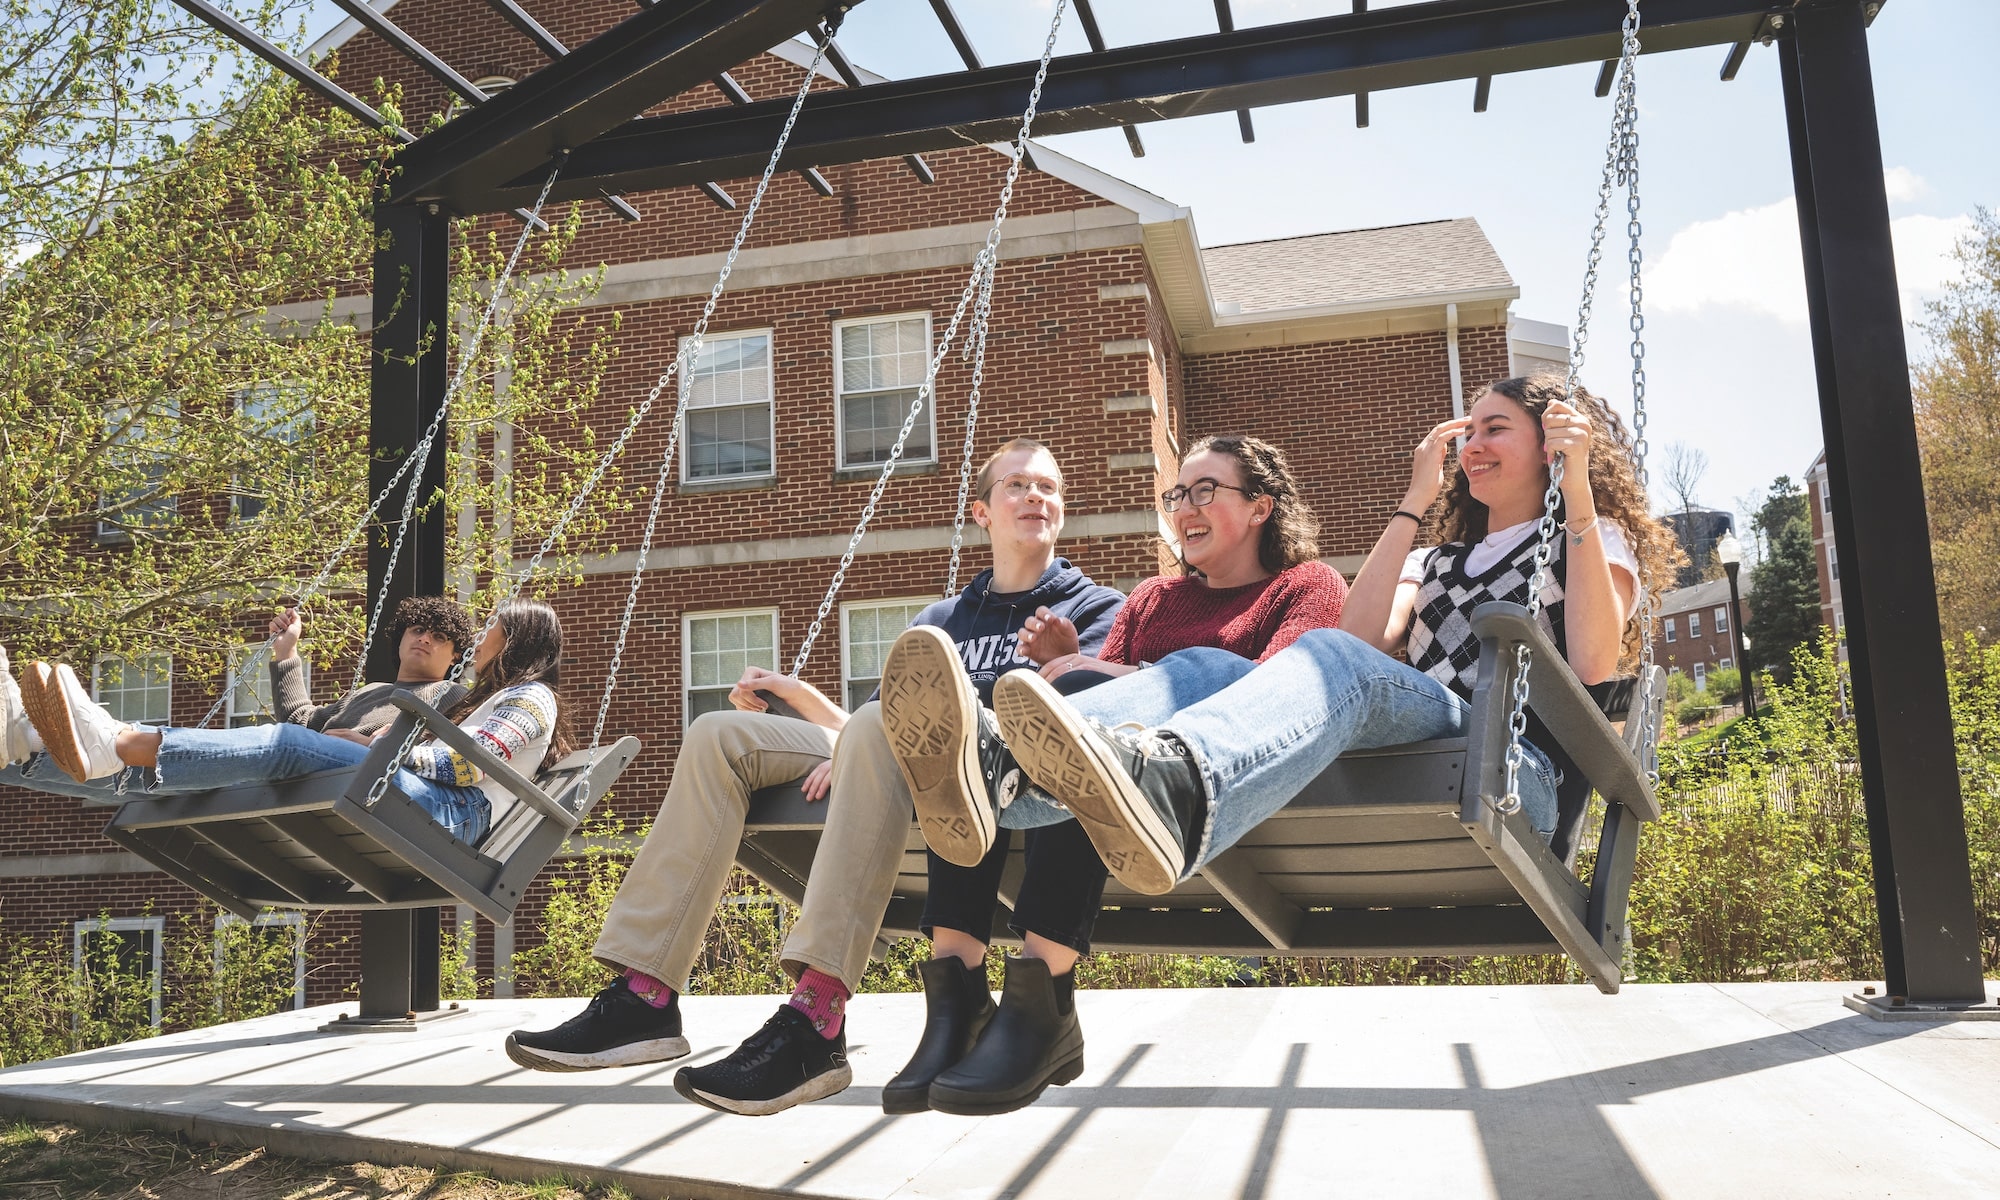 Students on the Swings by Silverstein Hall